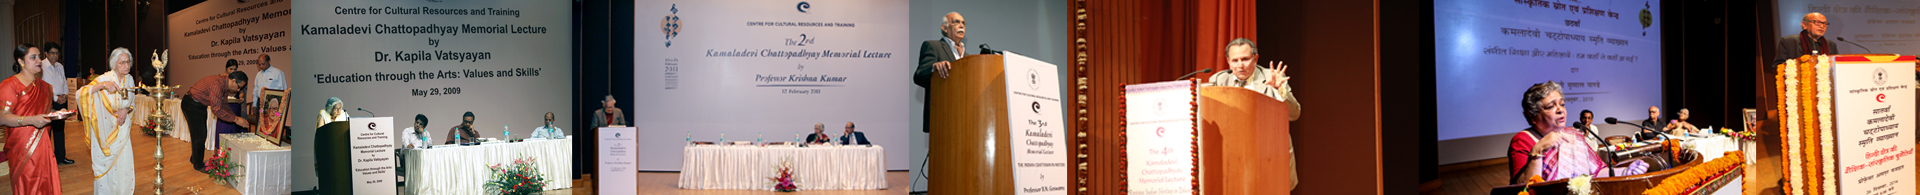 Kamaladevi Chattopadhyay Memorial Lecture